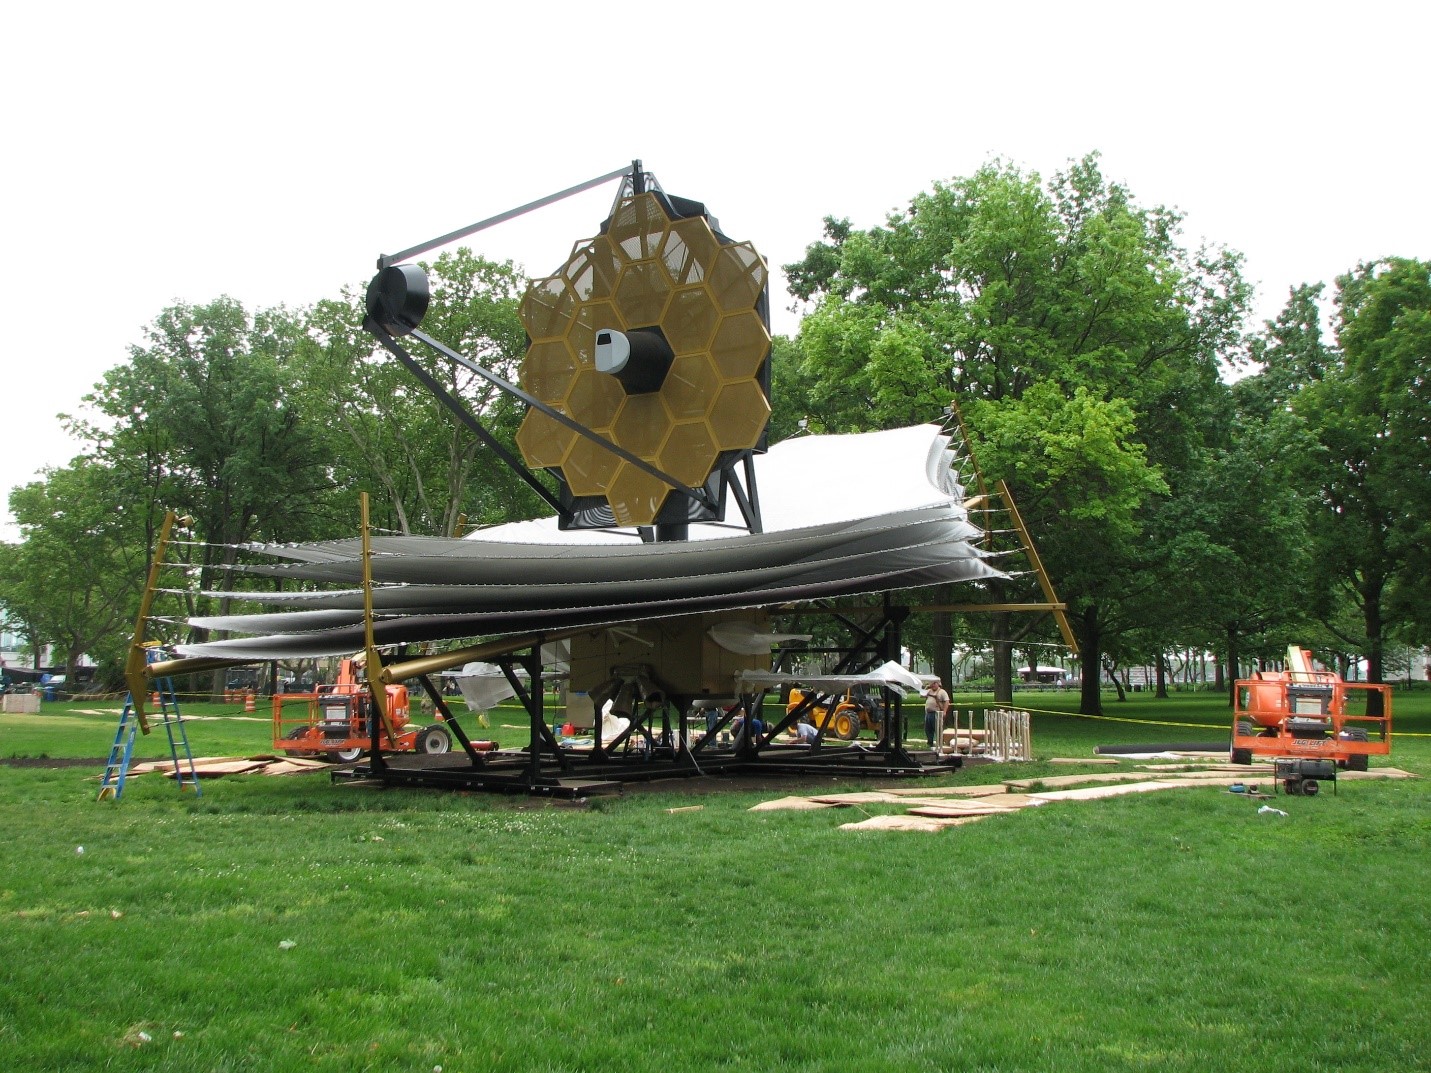 A full-scale model of the James Webb Space Telescope being constructed at Battery Park in NYC for the 2010 World Science Fair. (Credit: NASA)